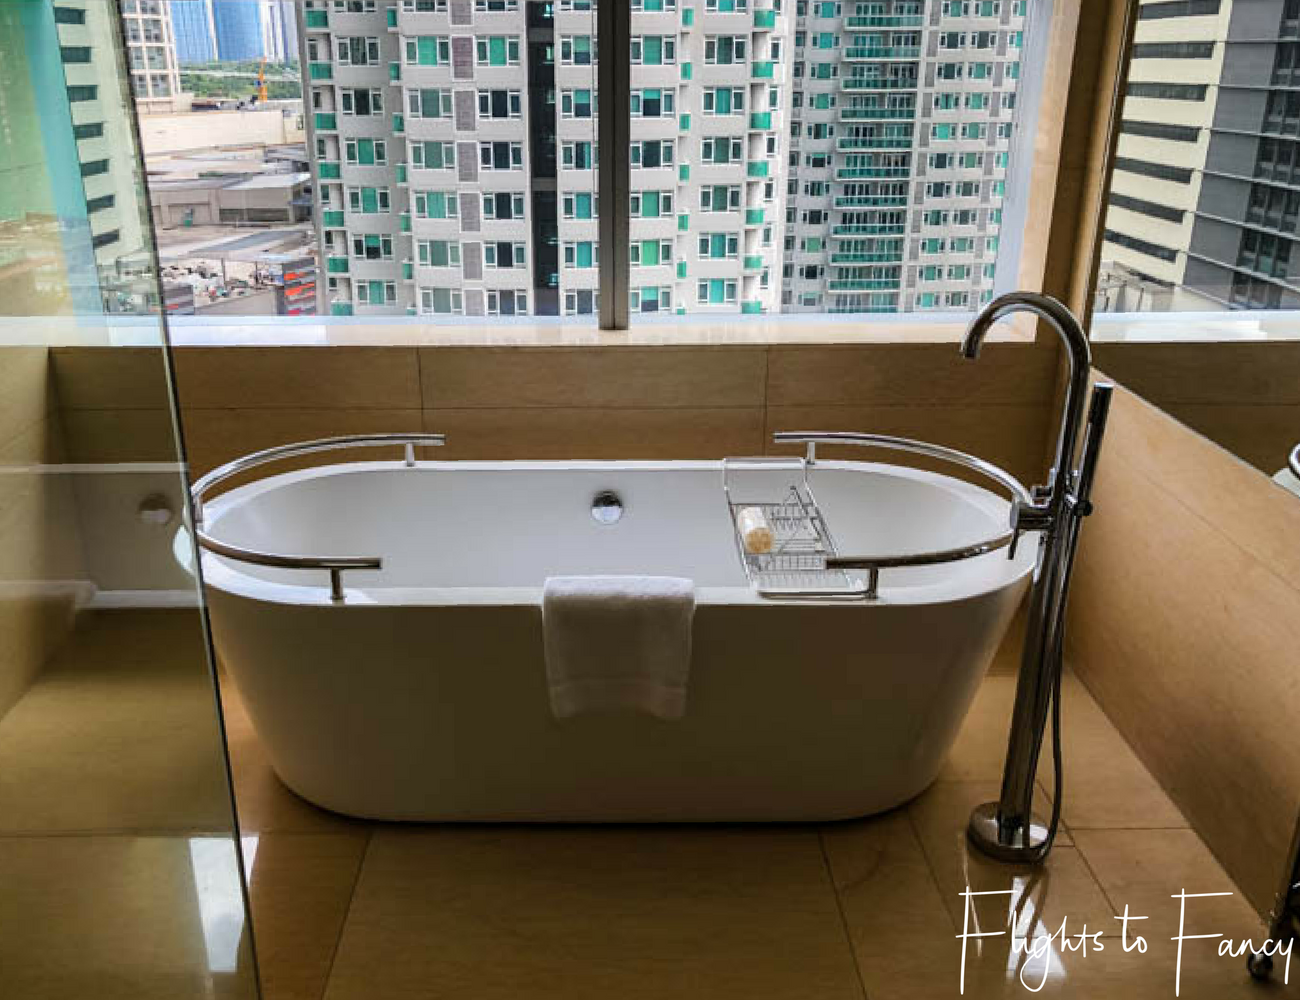 Flights To Fancy at Raffles Makati - This is where to stay in Manila!